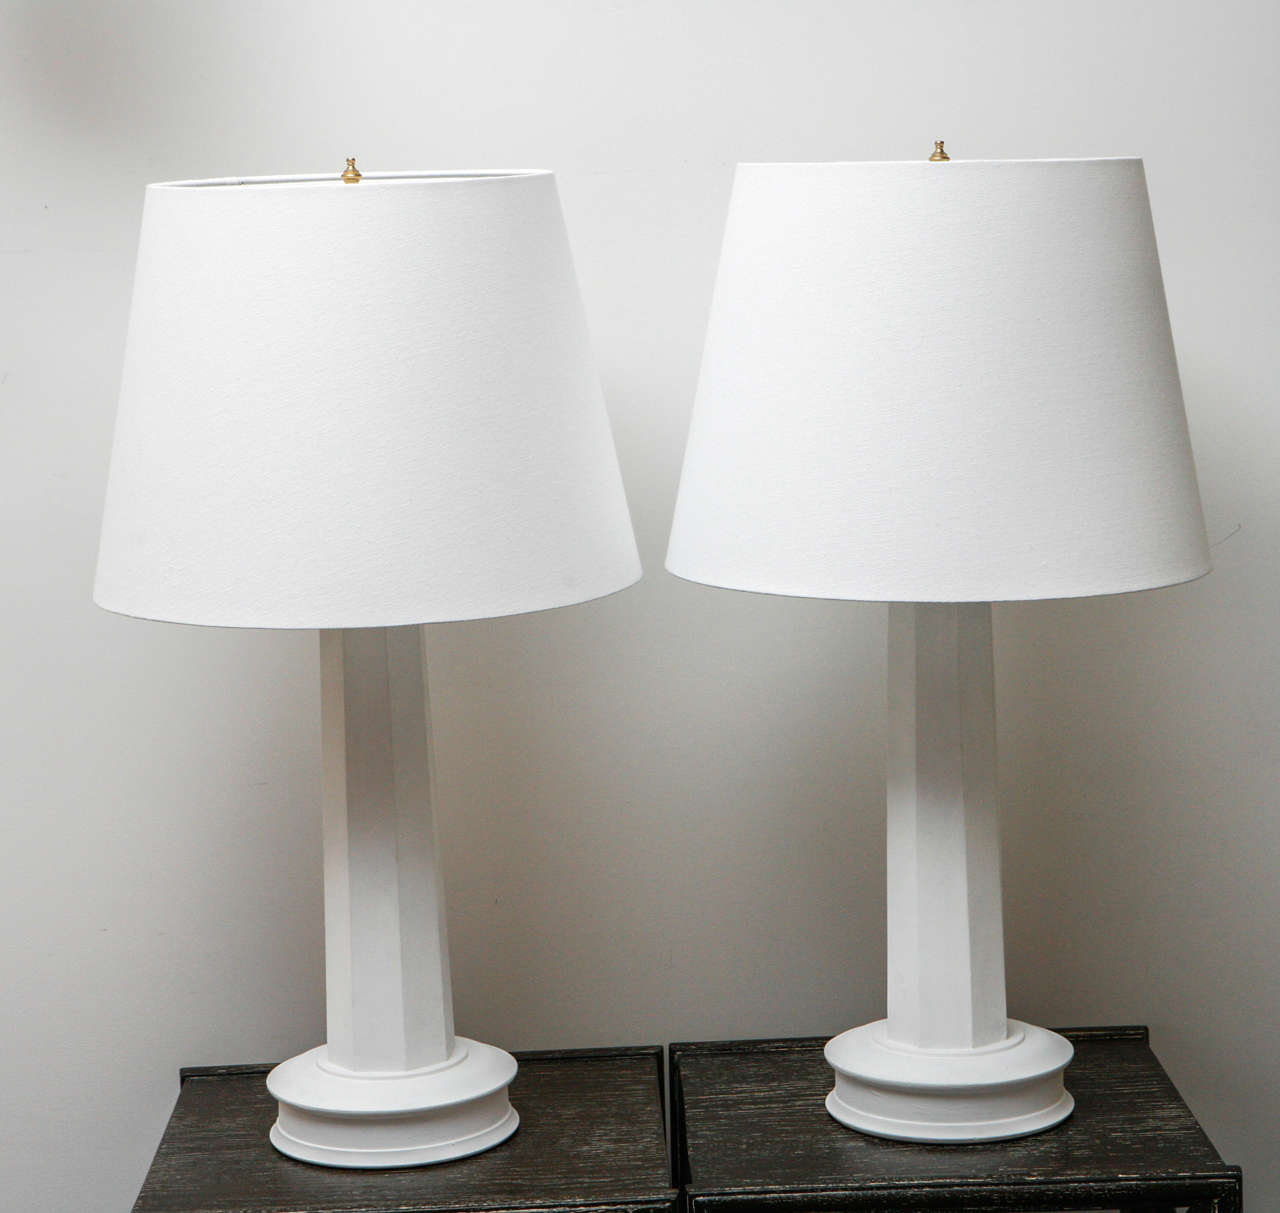 Striking pair of 1940s column table lamps in a gesso finish, with new custom linen shades. Recently rewired.